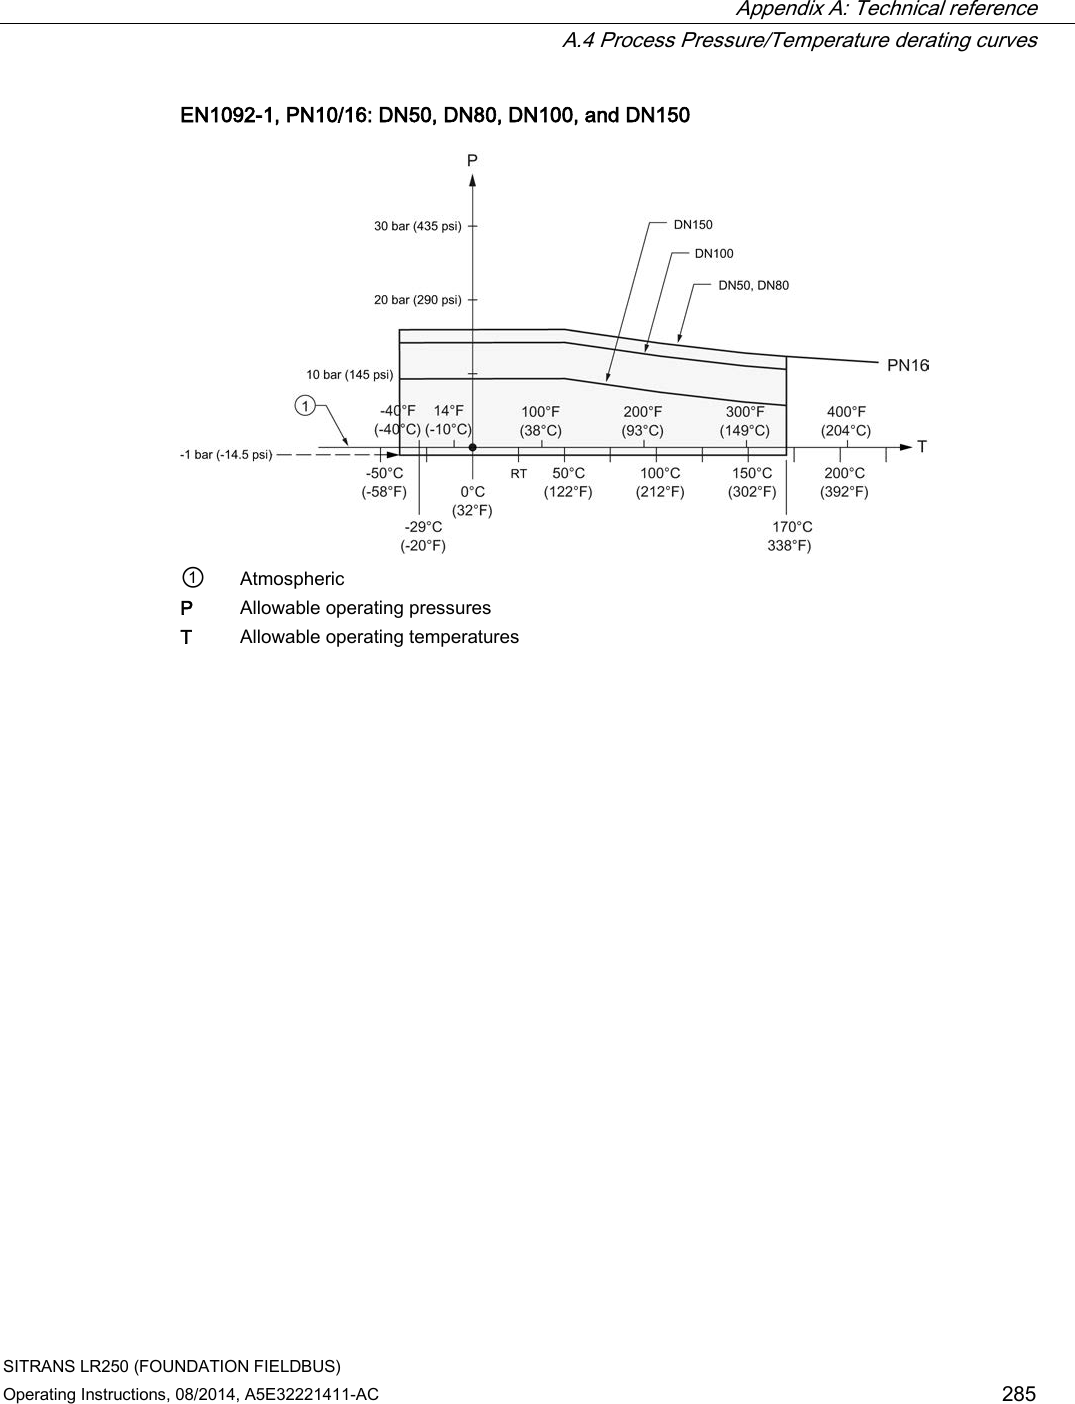  Appendix A: Technical reference  A.4 Process Pressure/Temperature derating curves SITRANS LR250 (FOUNDATION FIELDBUS) Operating Instructions, 08/2014, A5E32221411-AC 285 EN1092-1, PN10/16: DN50, DN80, DN100, and DN150  ① Atmospheric P Allowable operating pressures T Allowable operating temperatures 